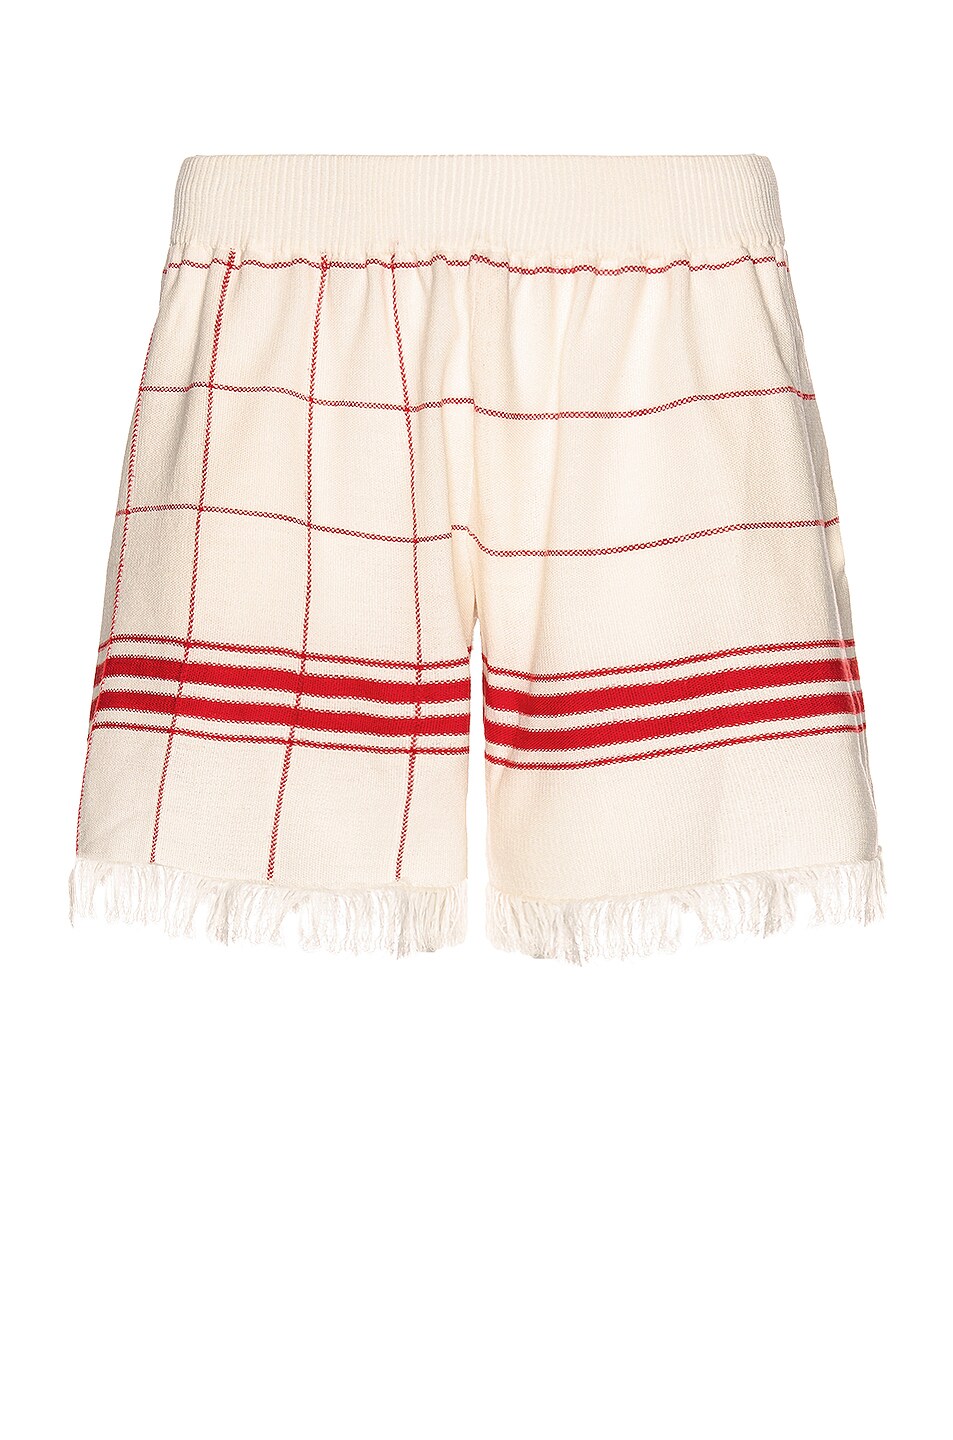 Image 1 of Maison Margiela Shorts in Being & Brown Check